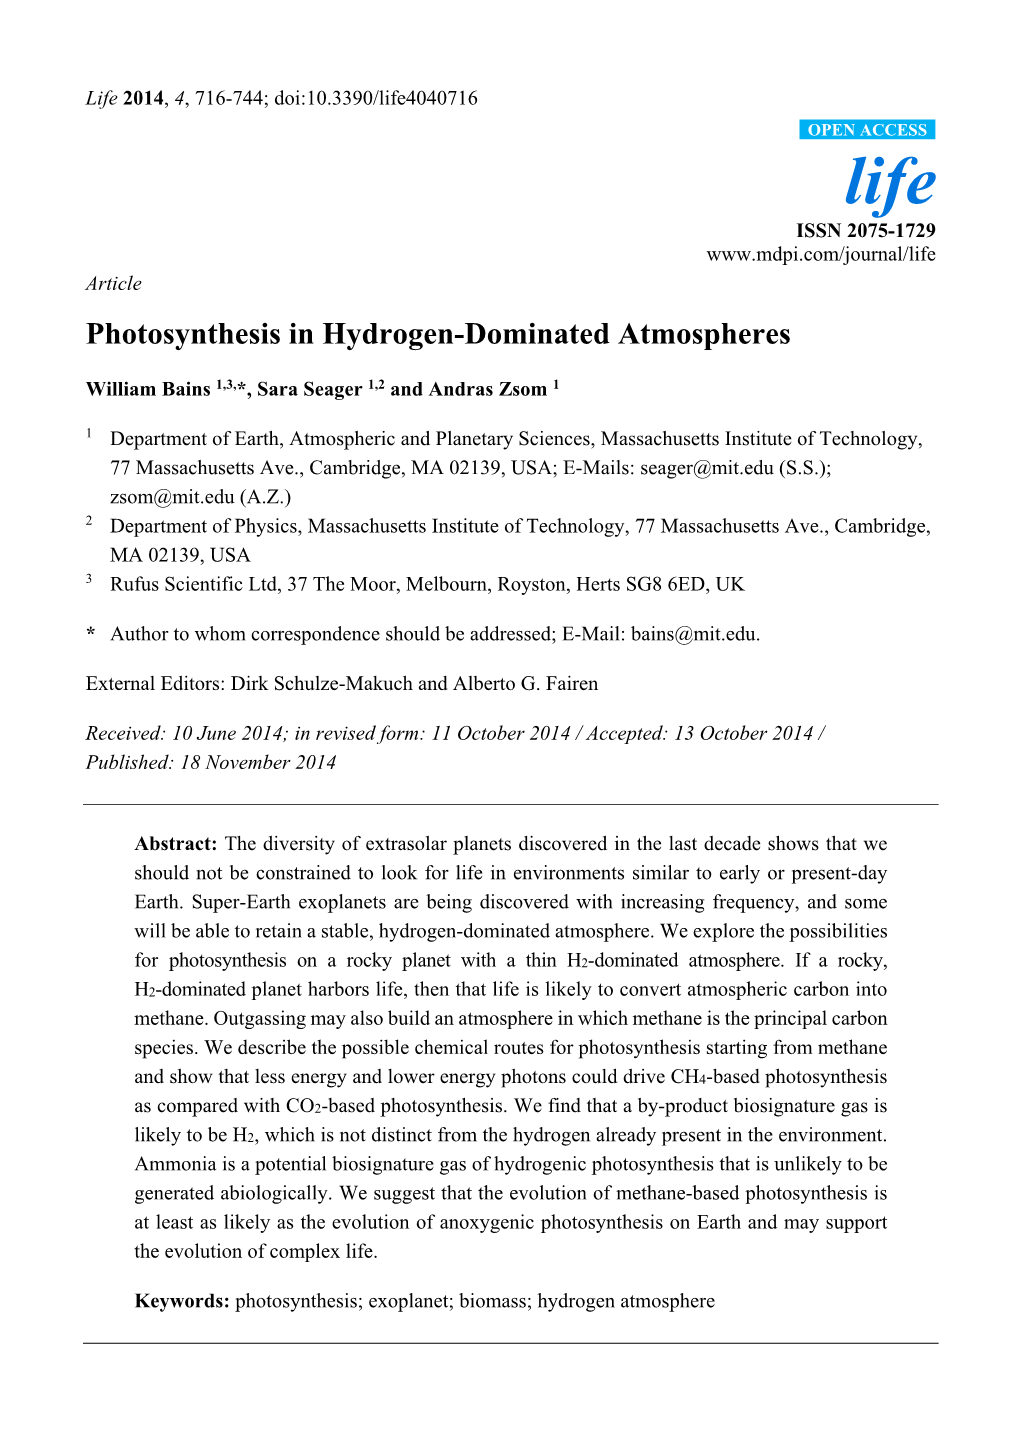 Photosynthesis in Hydrogen-Dominated Atmospheres